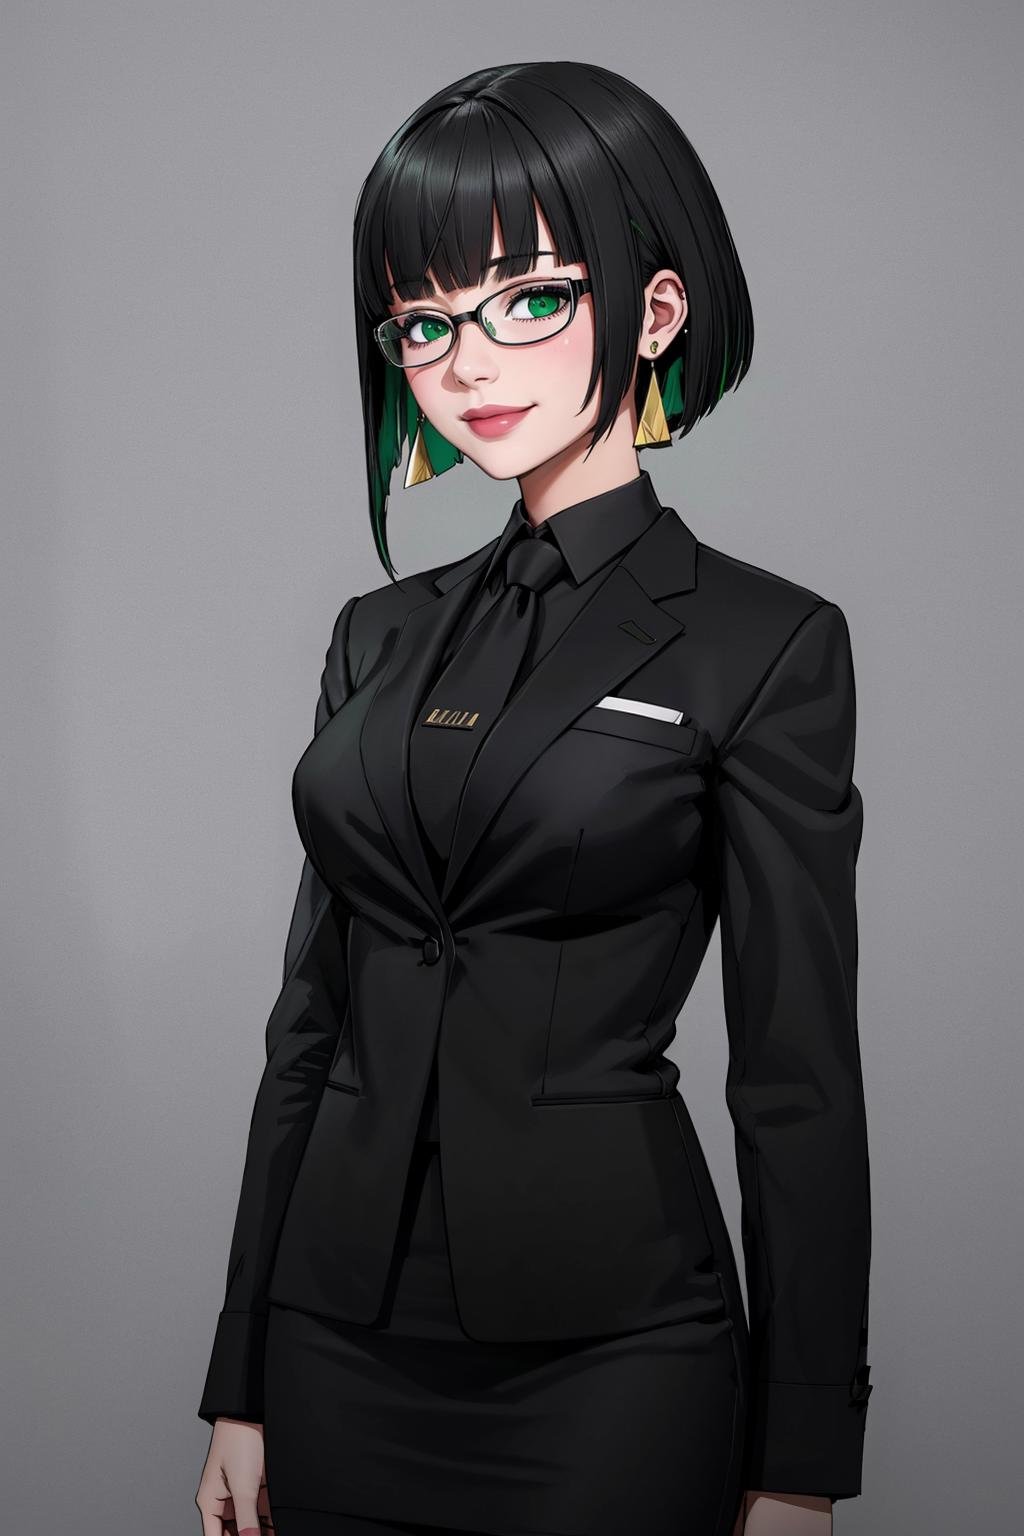 ((Masterpiece, best quality,edgQuality))smiling,solo,1girl,posing for a picture,edgAllmind,blunt bangs,two tone hair,earrings,black suit,necktie, green eyes,pencil skirt,glasses<lora:edgArmoredCore6Allmind:0.8>